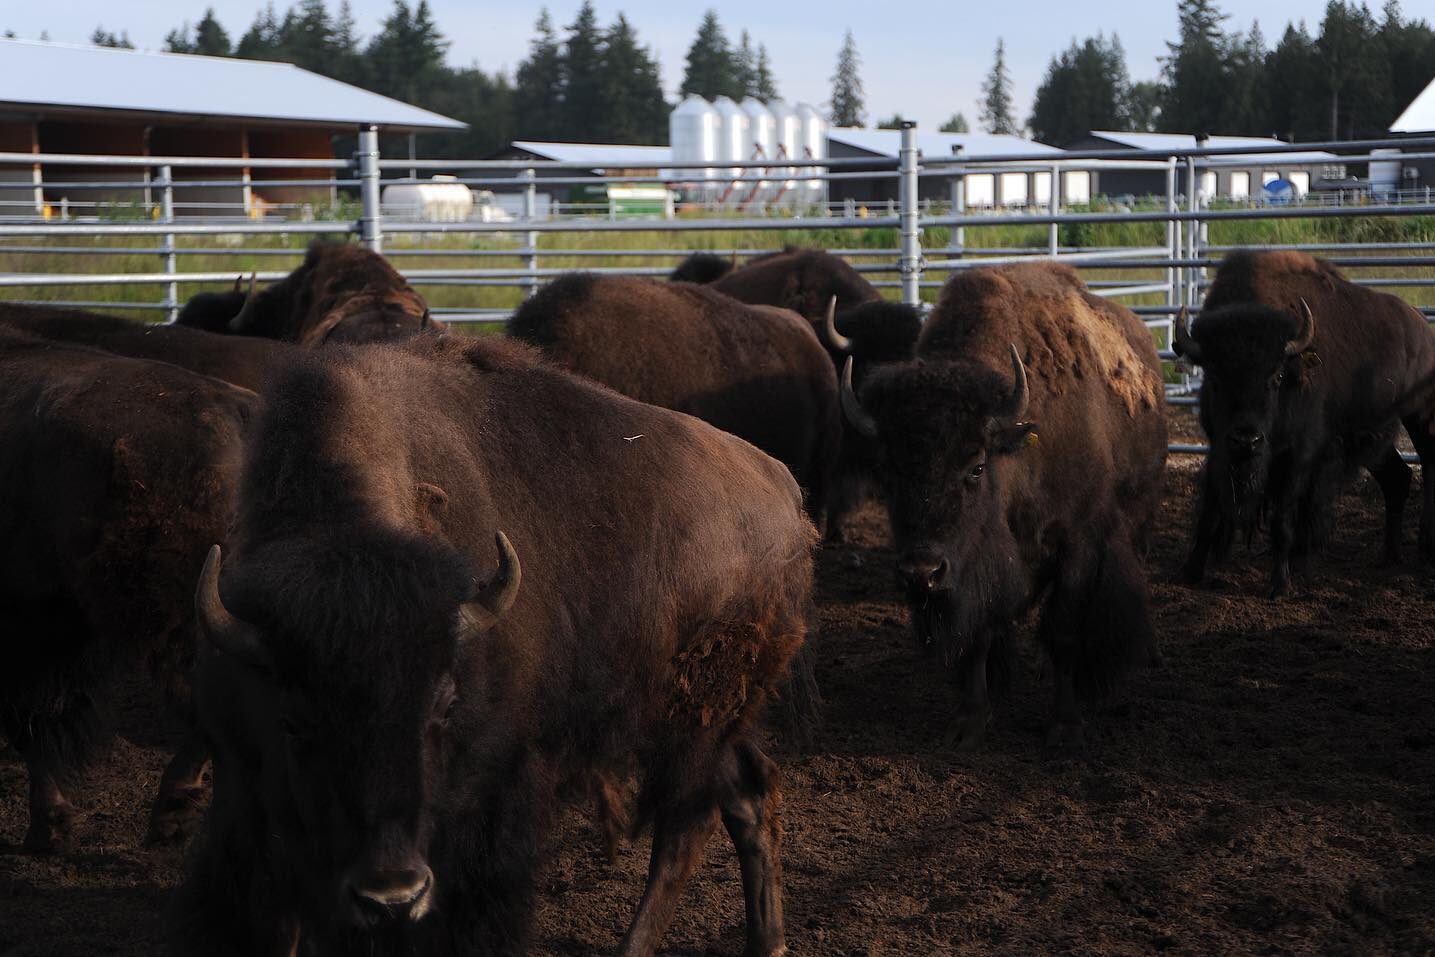 Buffalo and Bison at Academy Farms